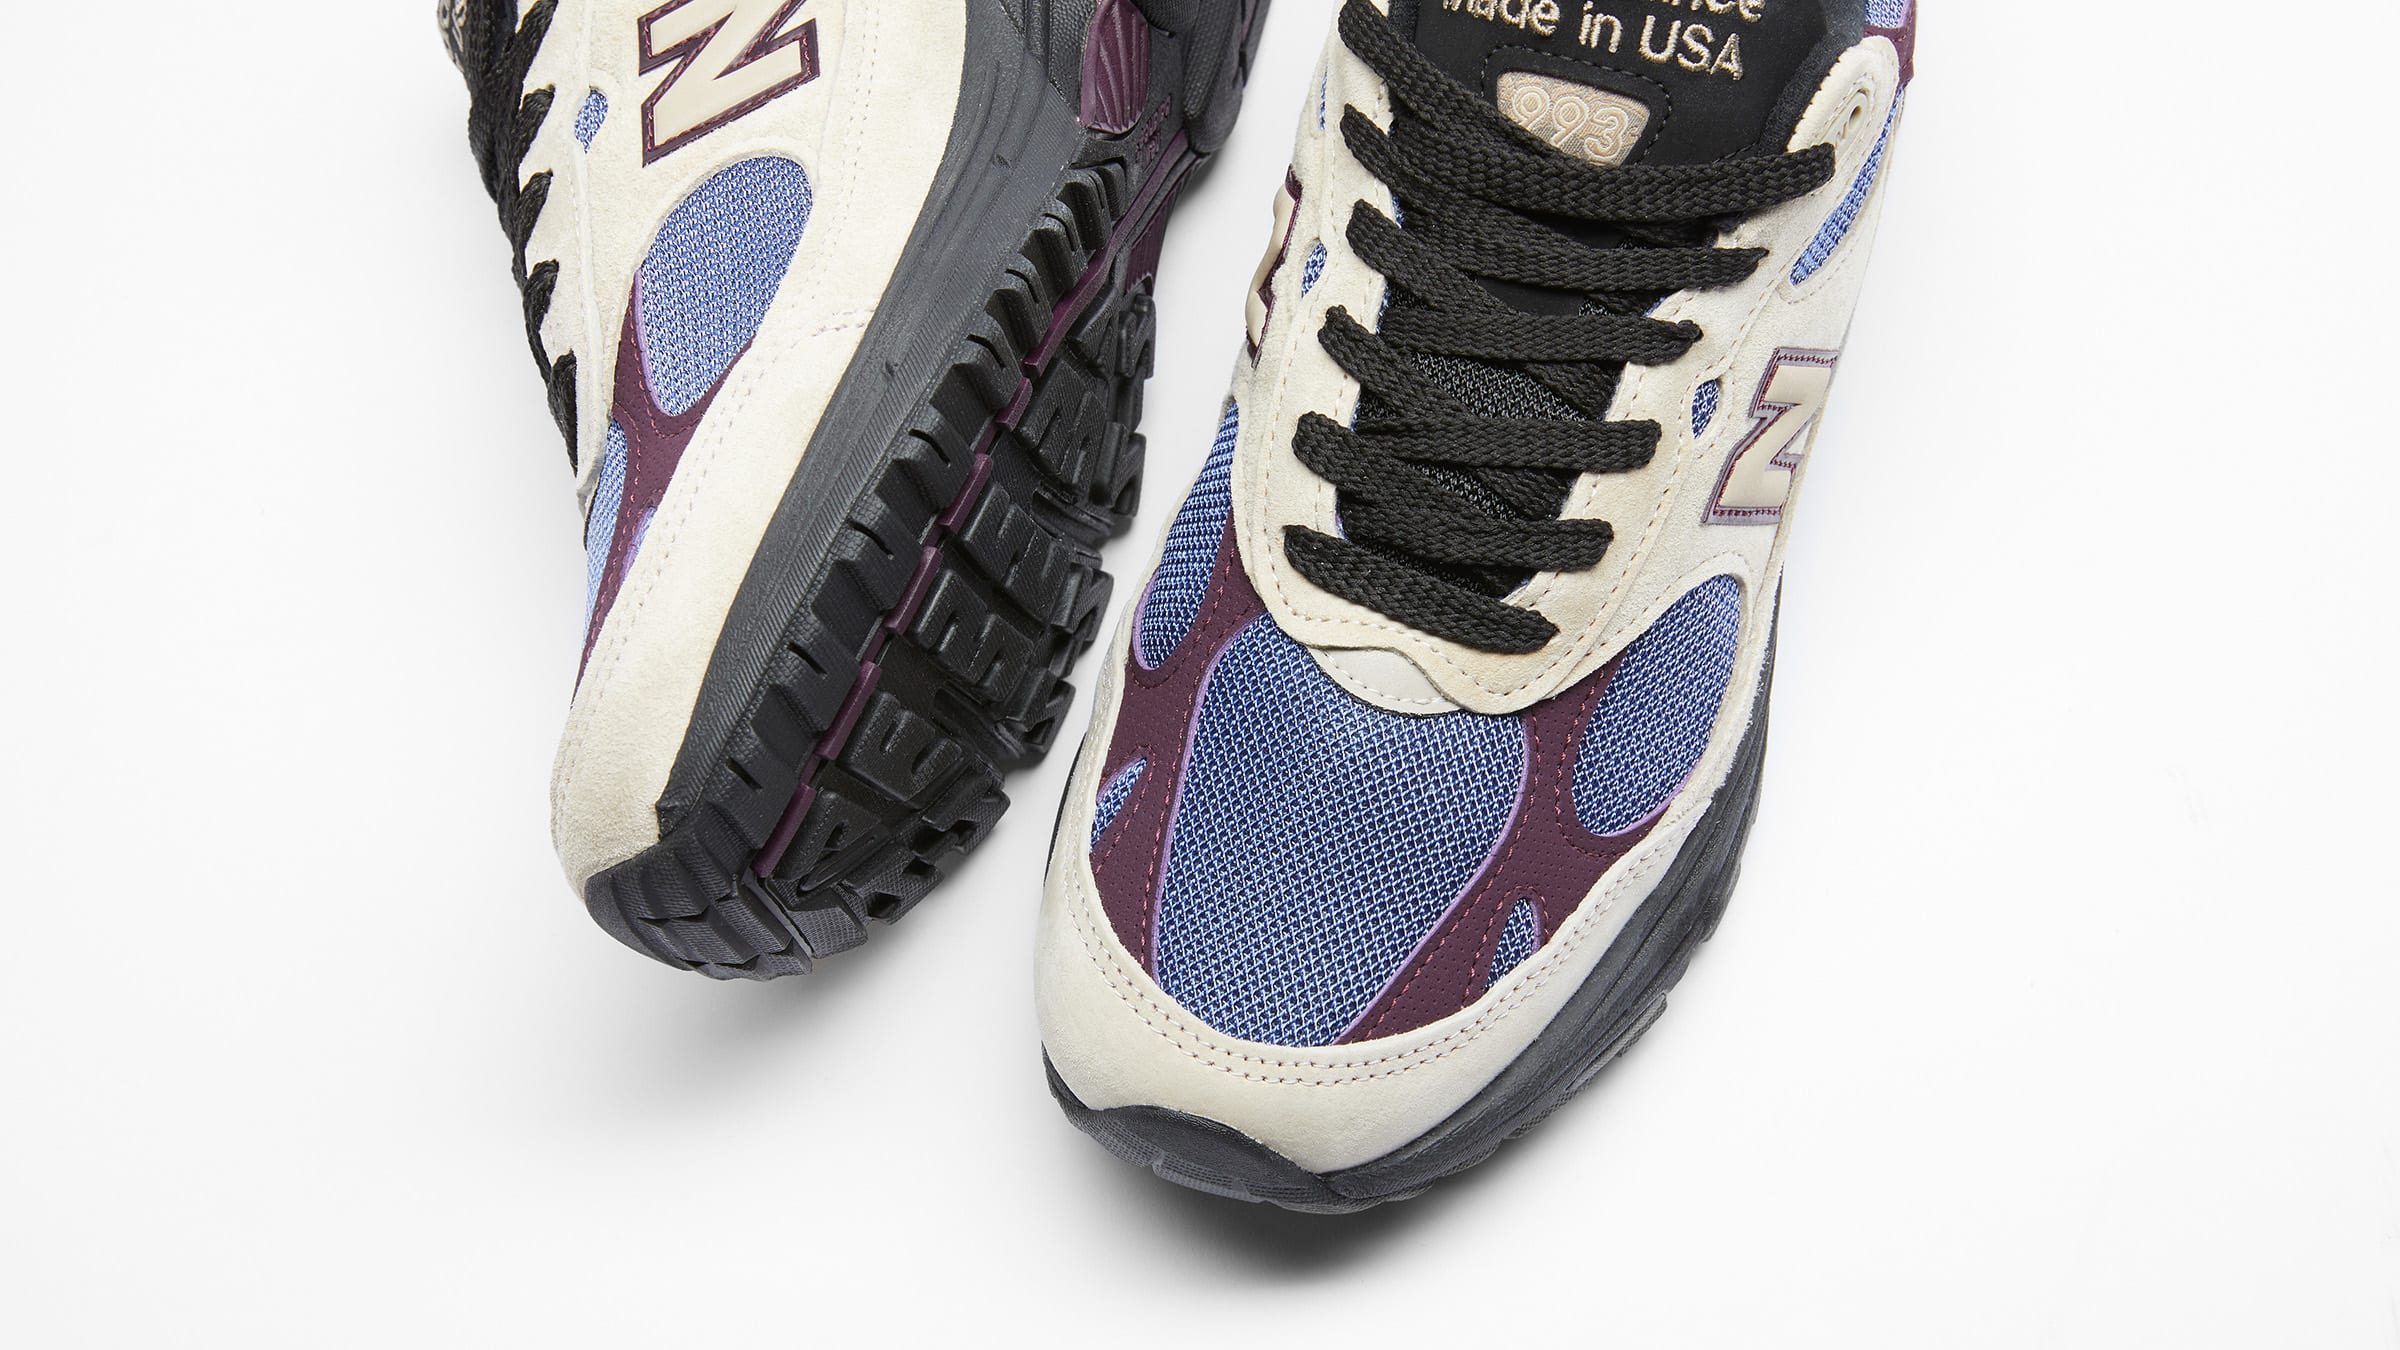 New Balance x Aime Leon Dore 993 - Made in the USA (Beige, Blue